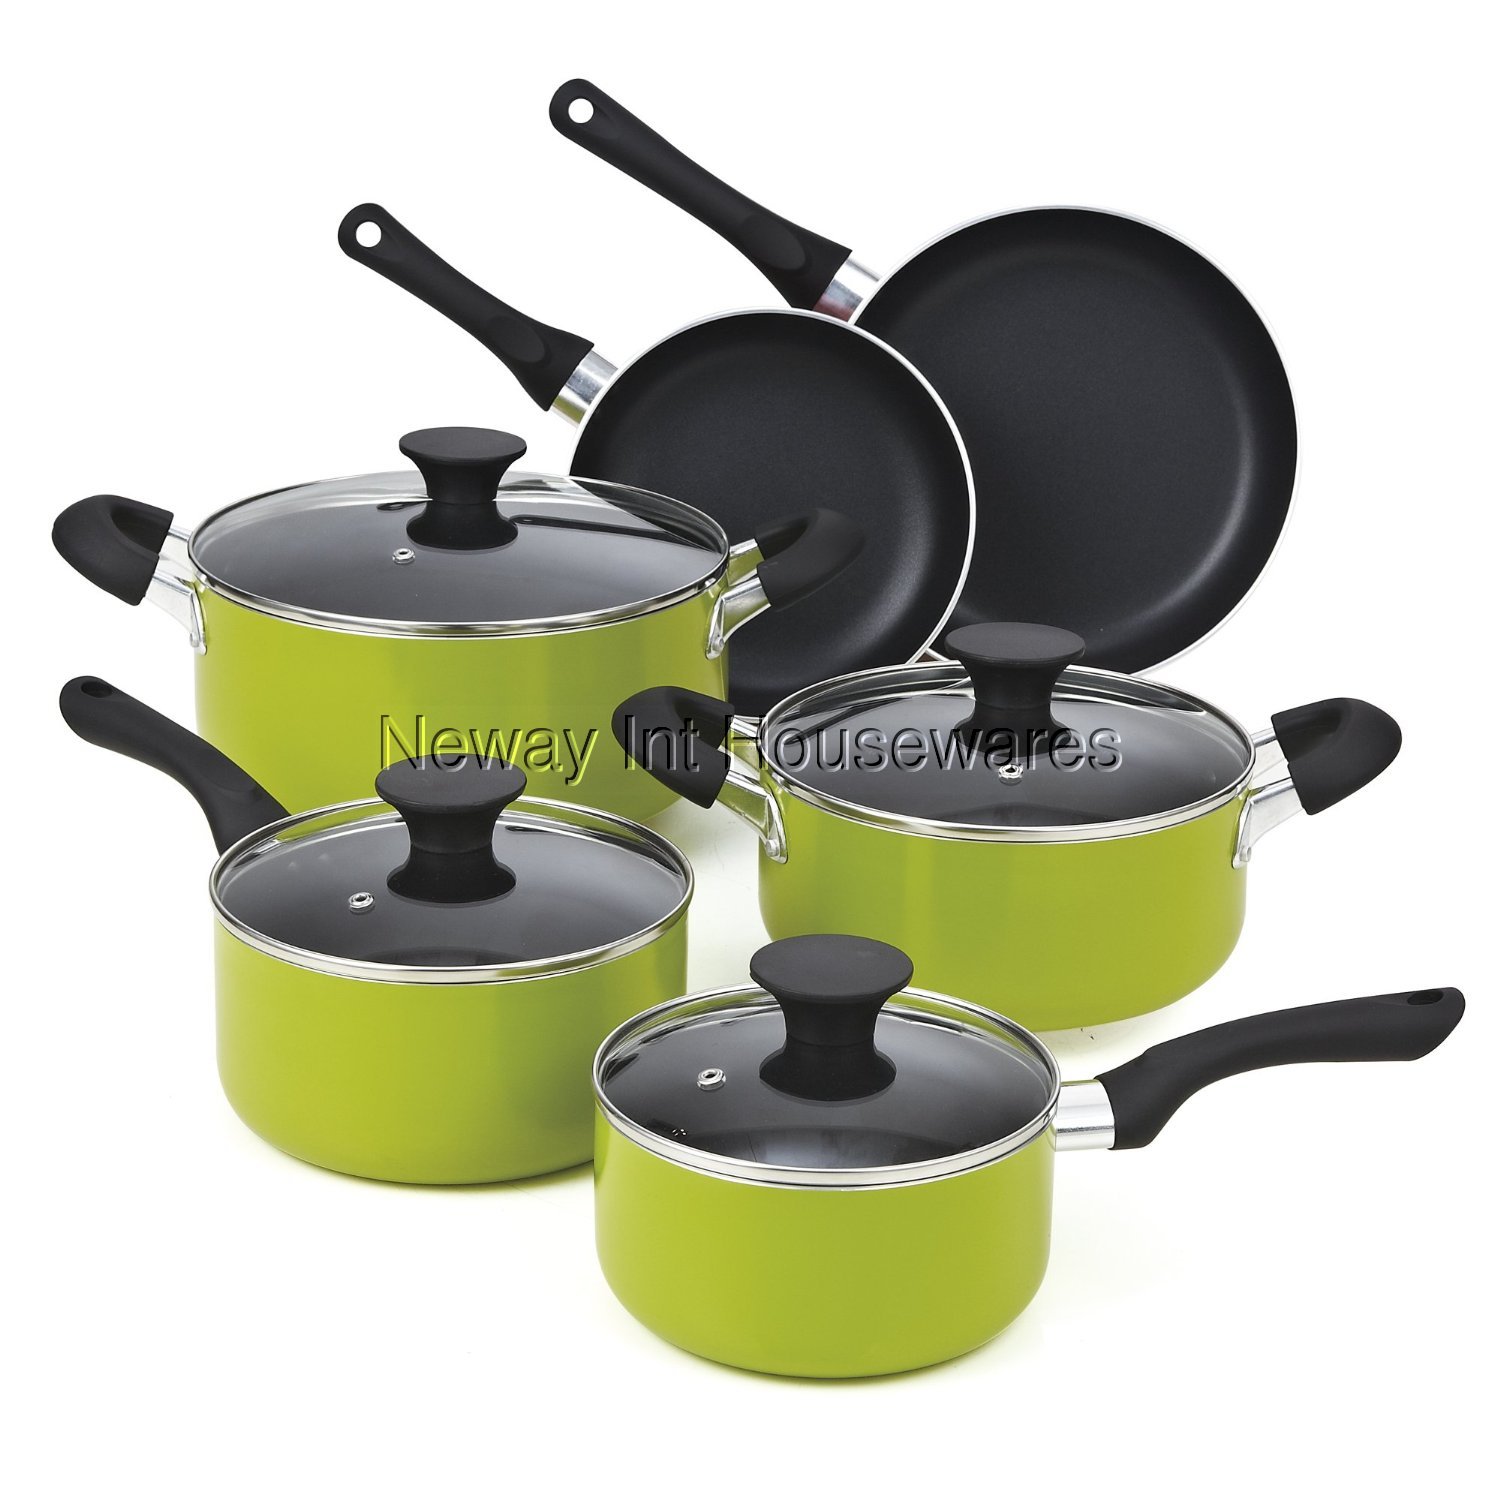 Cook N Home 10-Piece Ceramic Coating Nonstick Kitchen Cookware